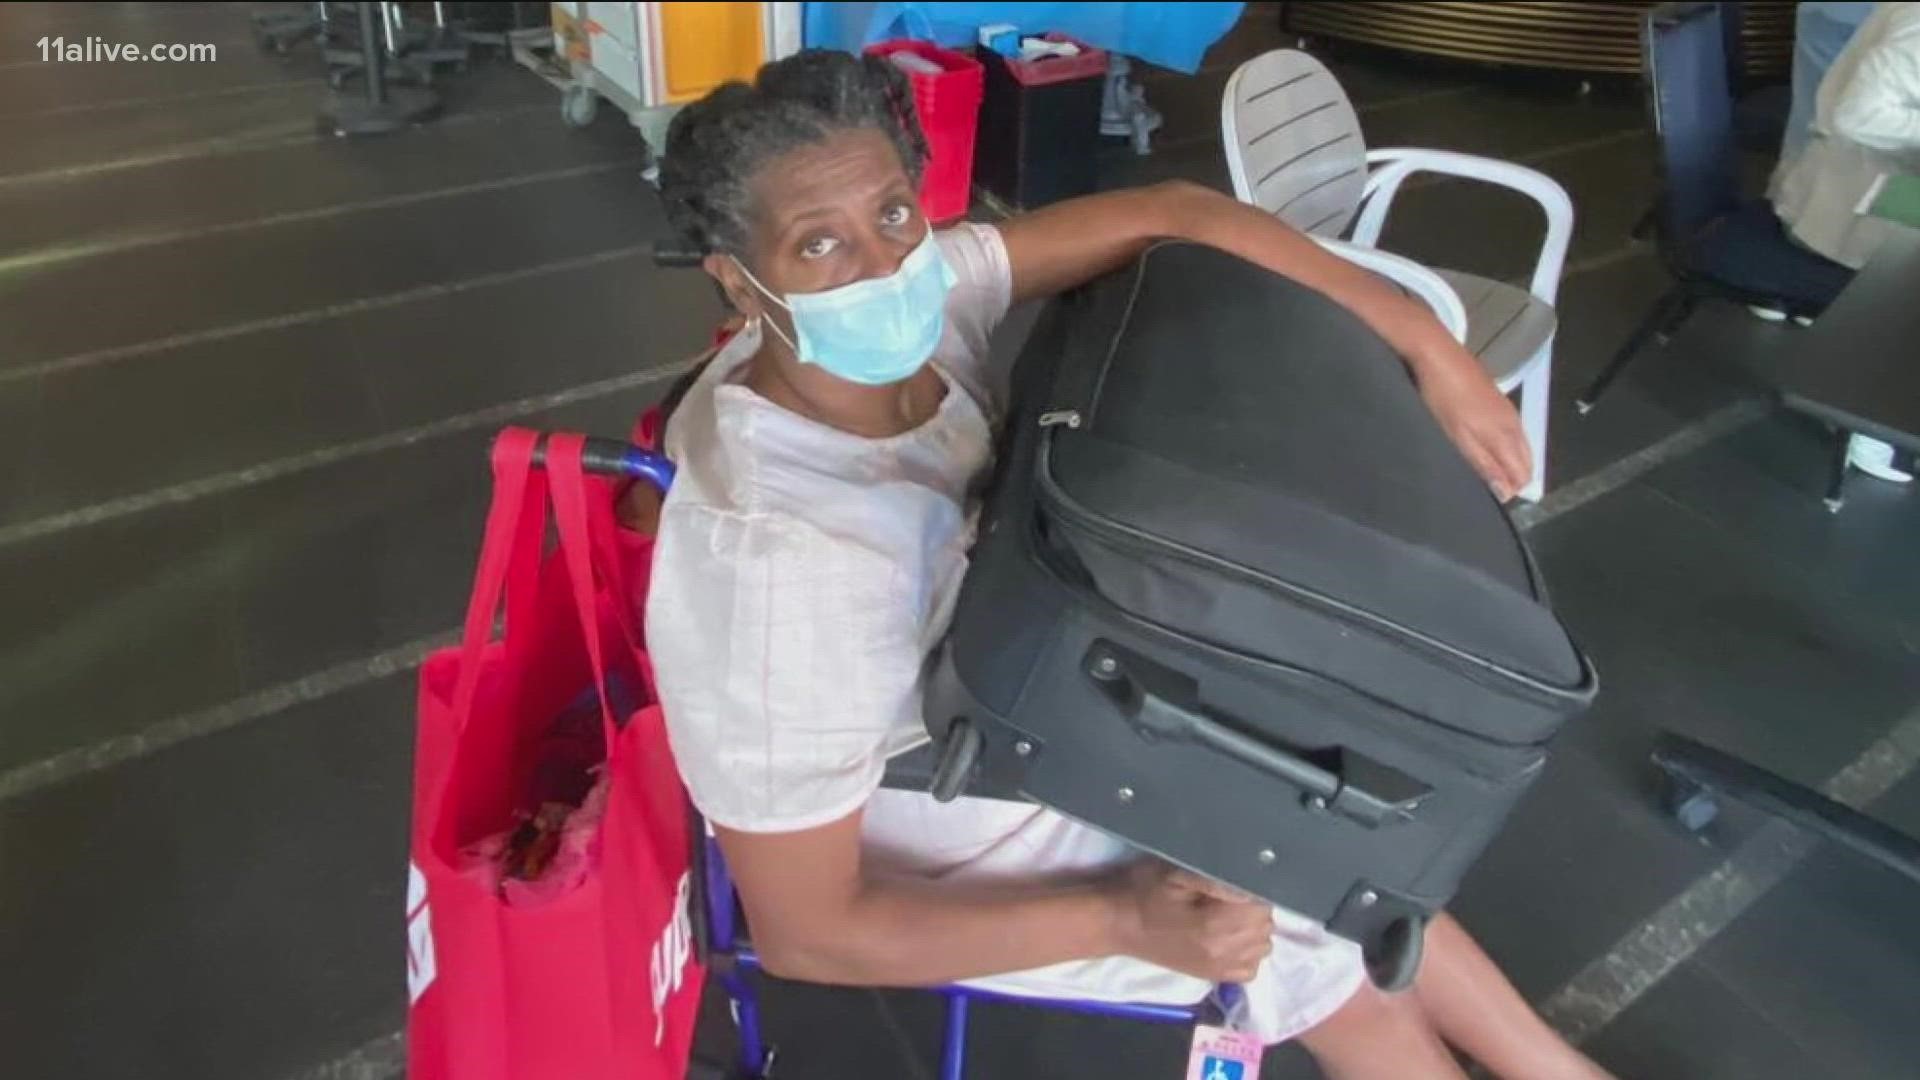 After running out of medical supplies during a government-mandated quarantine in Panama, an Atlanta woman is finally home.